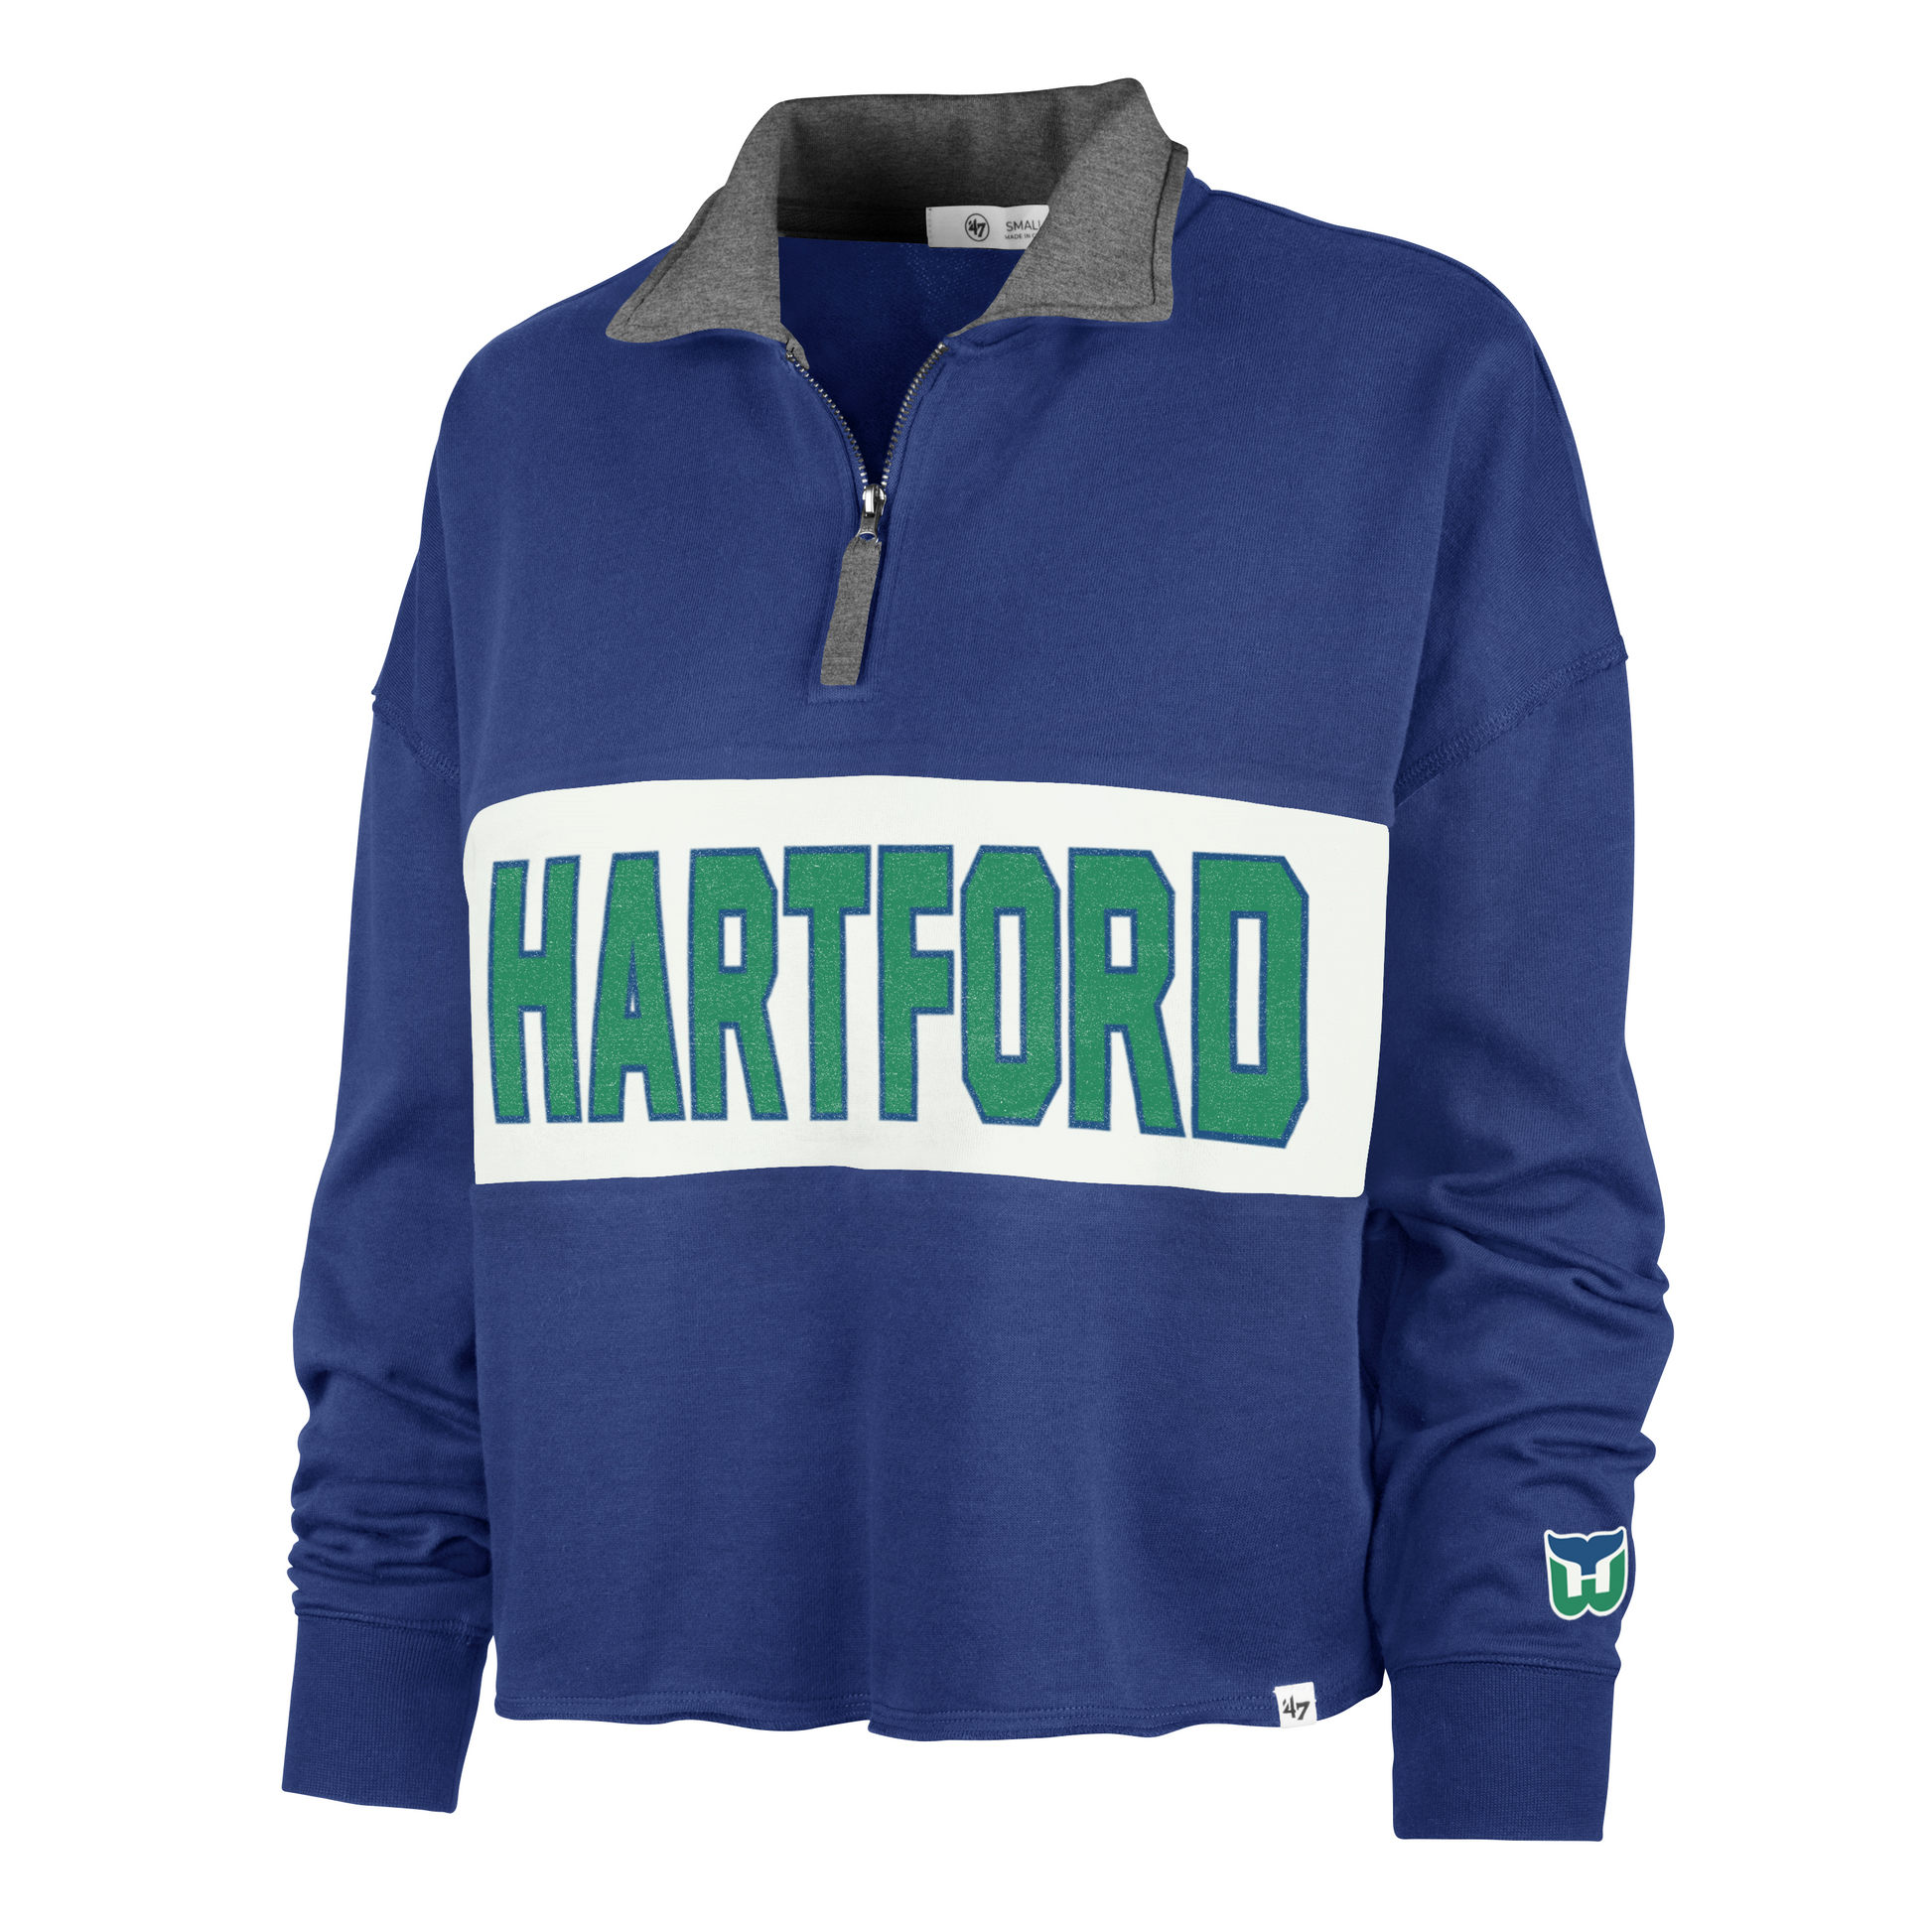 Front: Blue and white quarter zip with gray collar, Hartford in green with whalers logo on sleeve